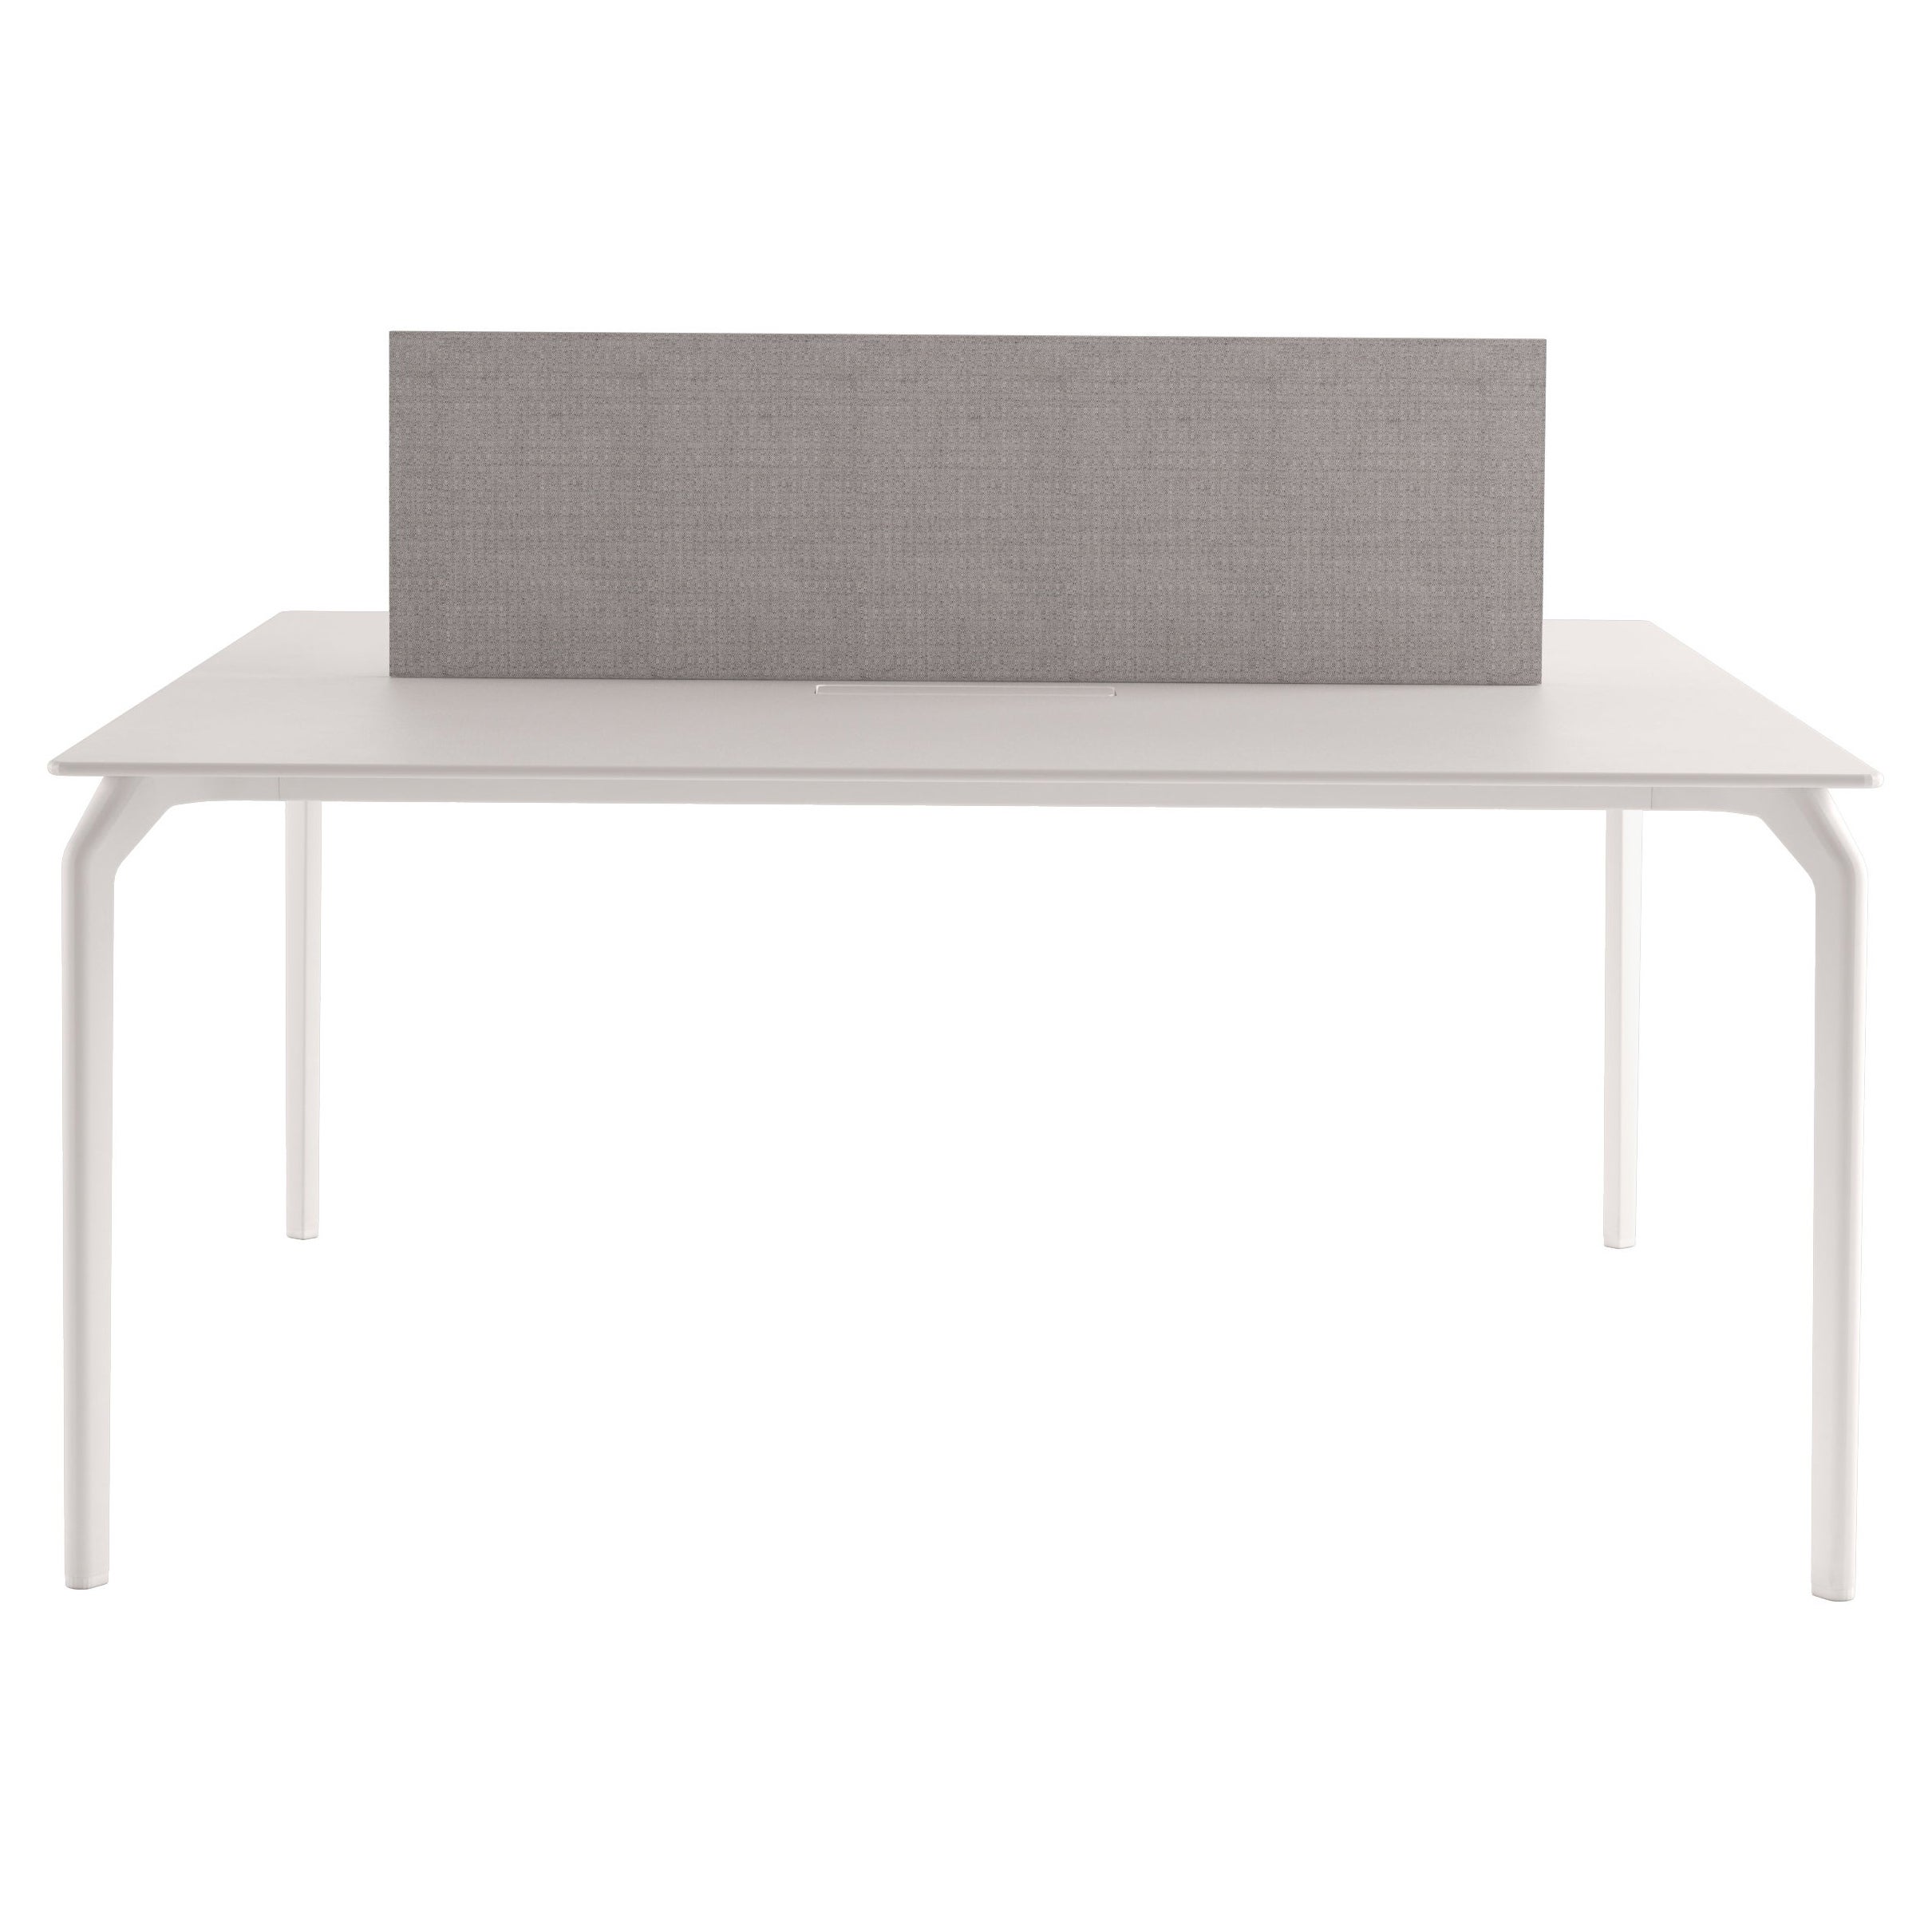 Alias 641 TEC Cable Table in White with Lacquered Aluminum Frame